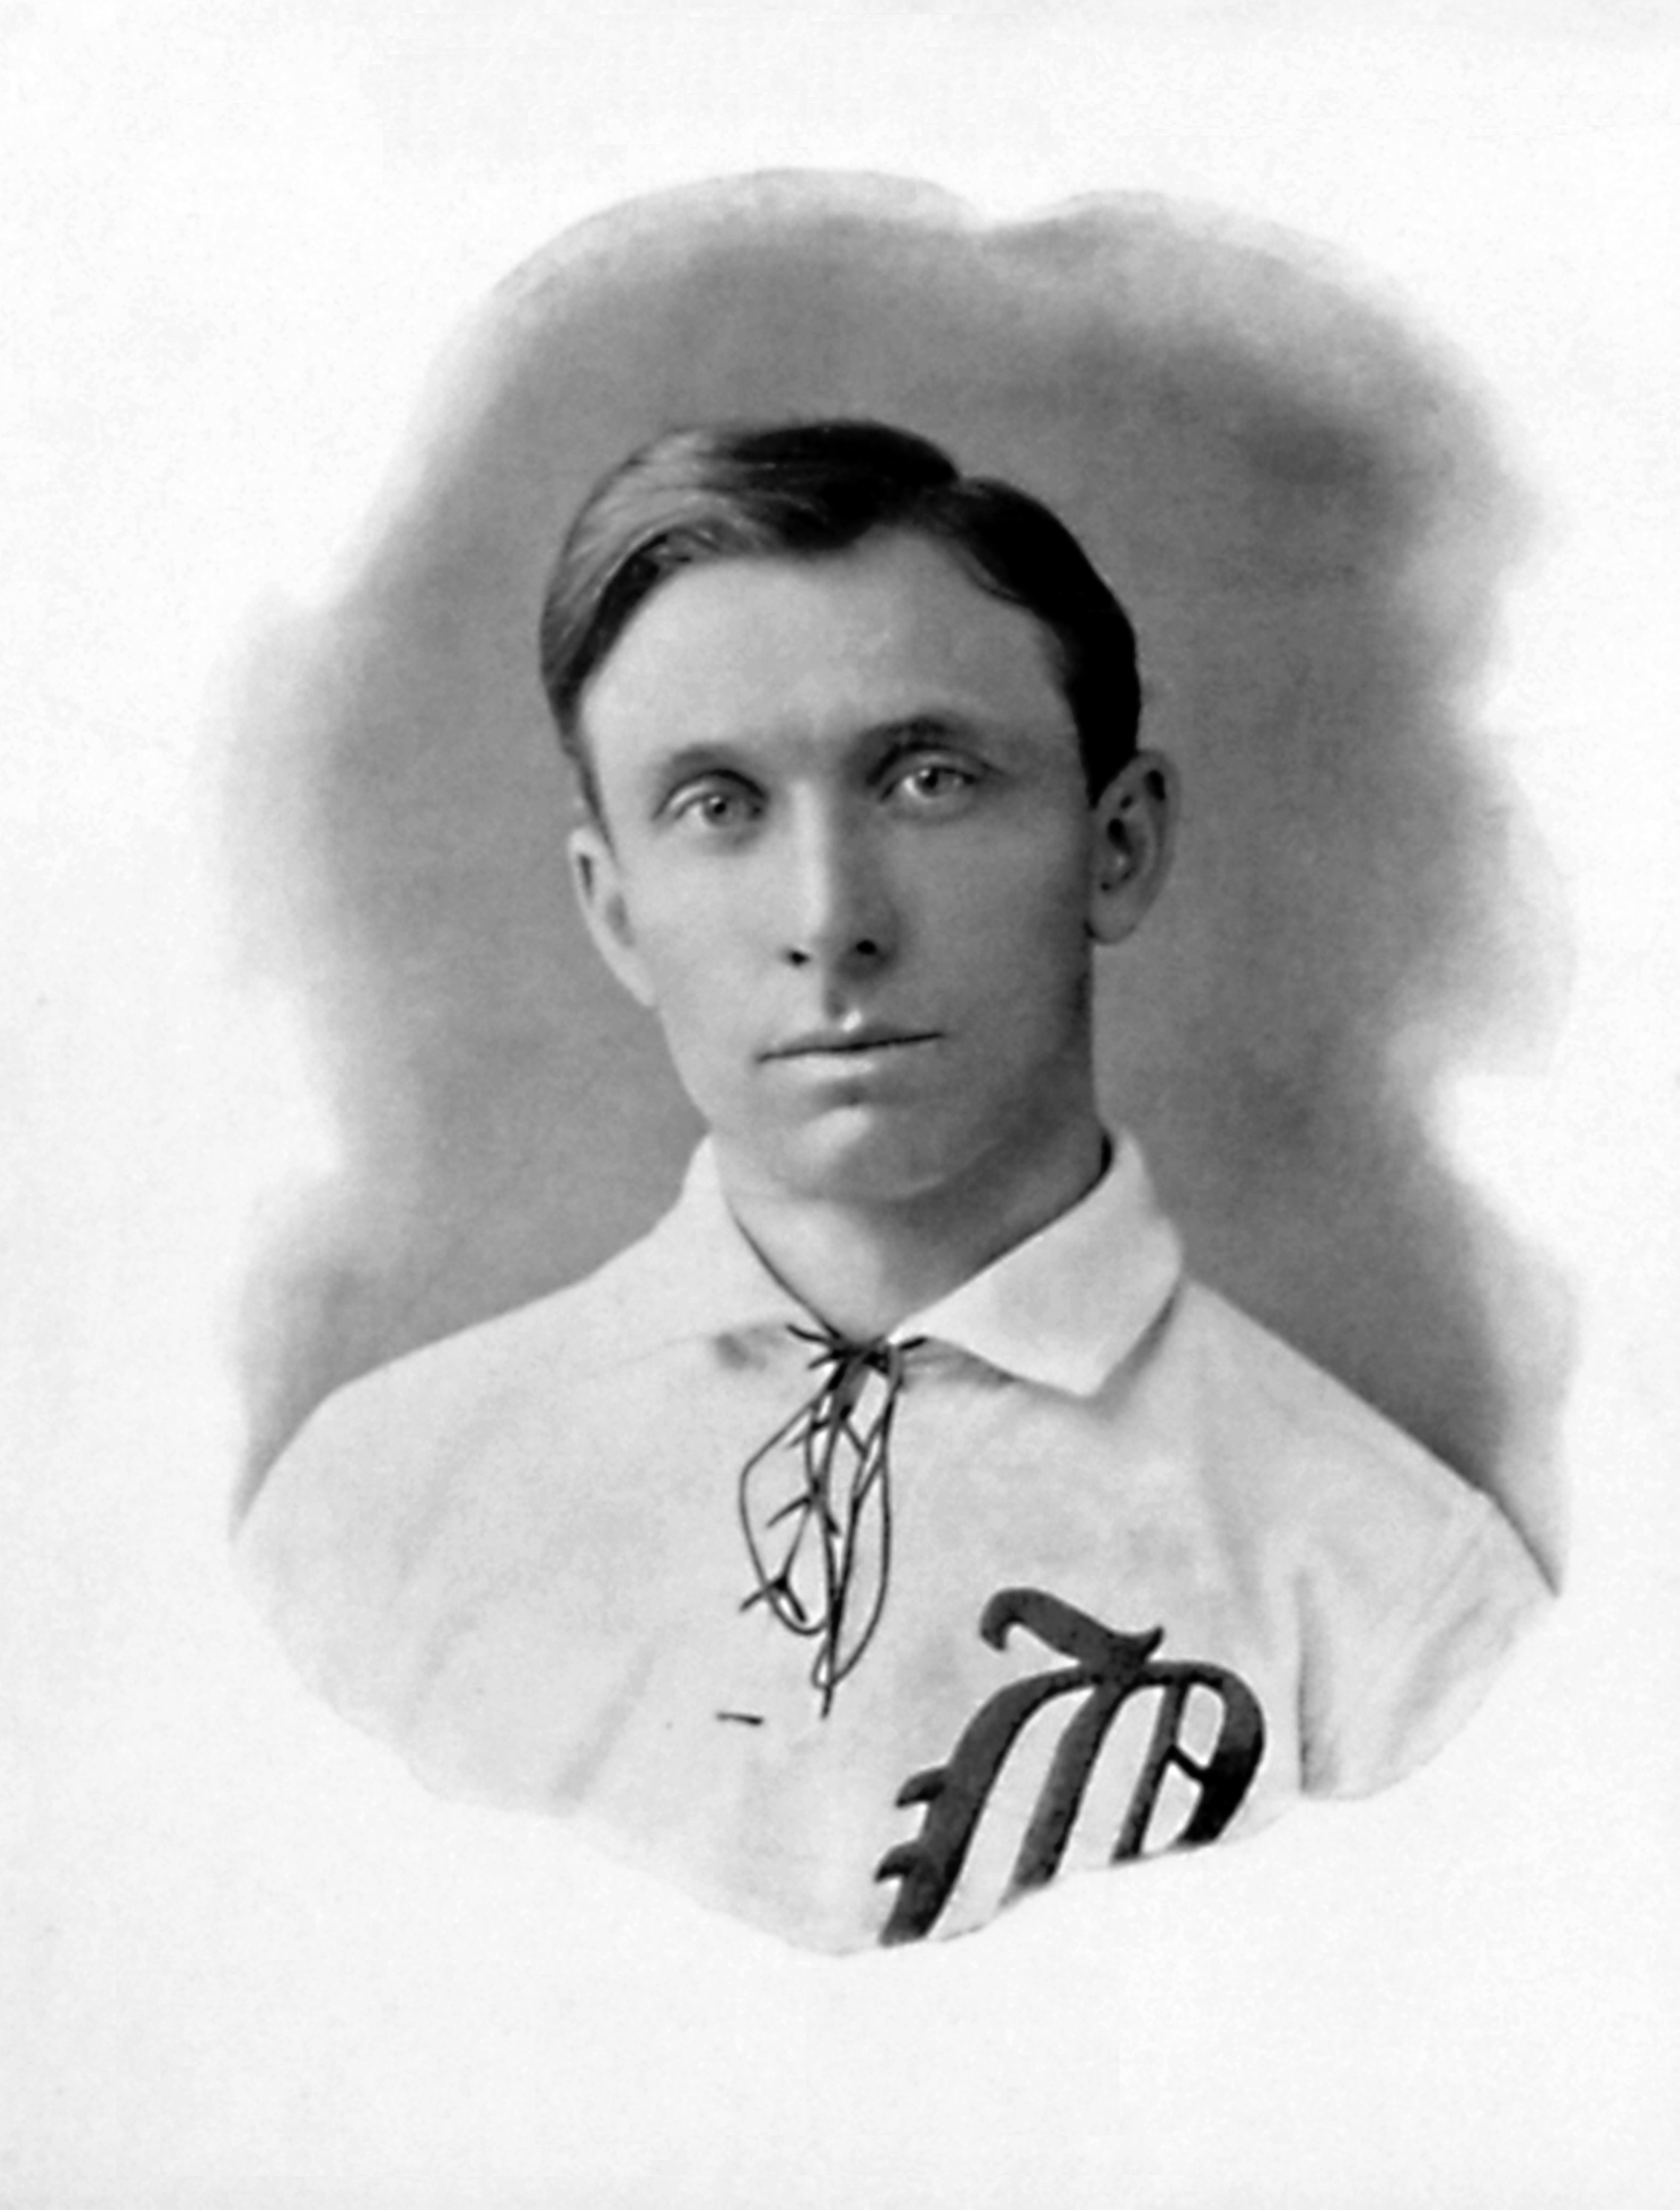 Ted Lewis 1900 (The Sporting News)